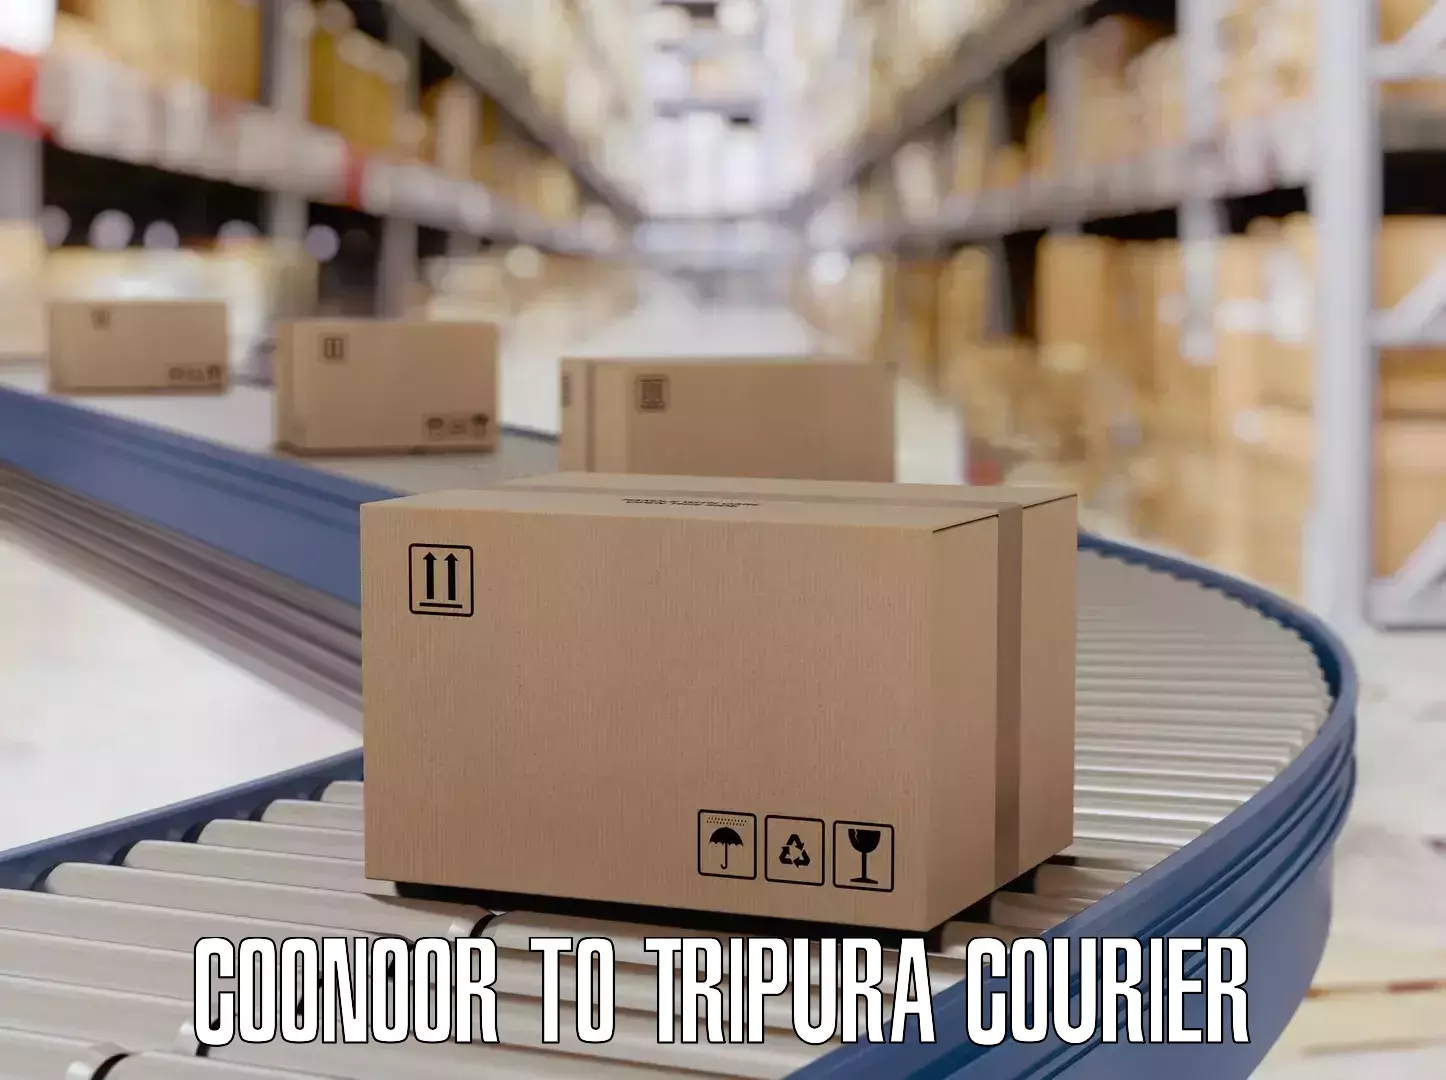 Luggage shipping estimate in Coonoor to Tripura